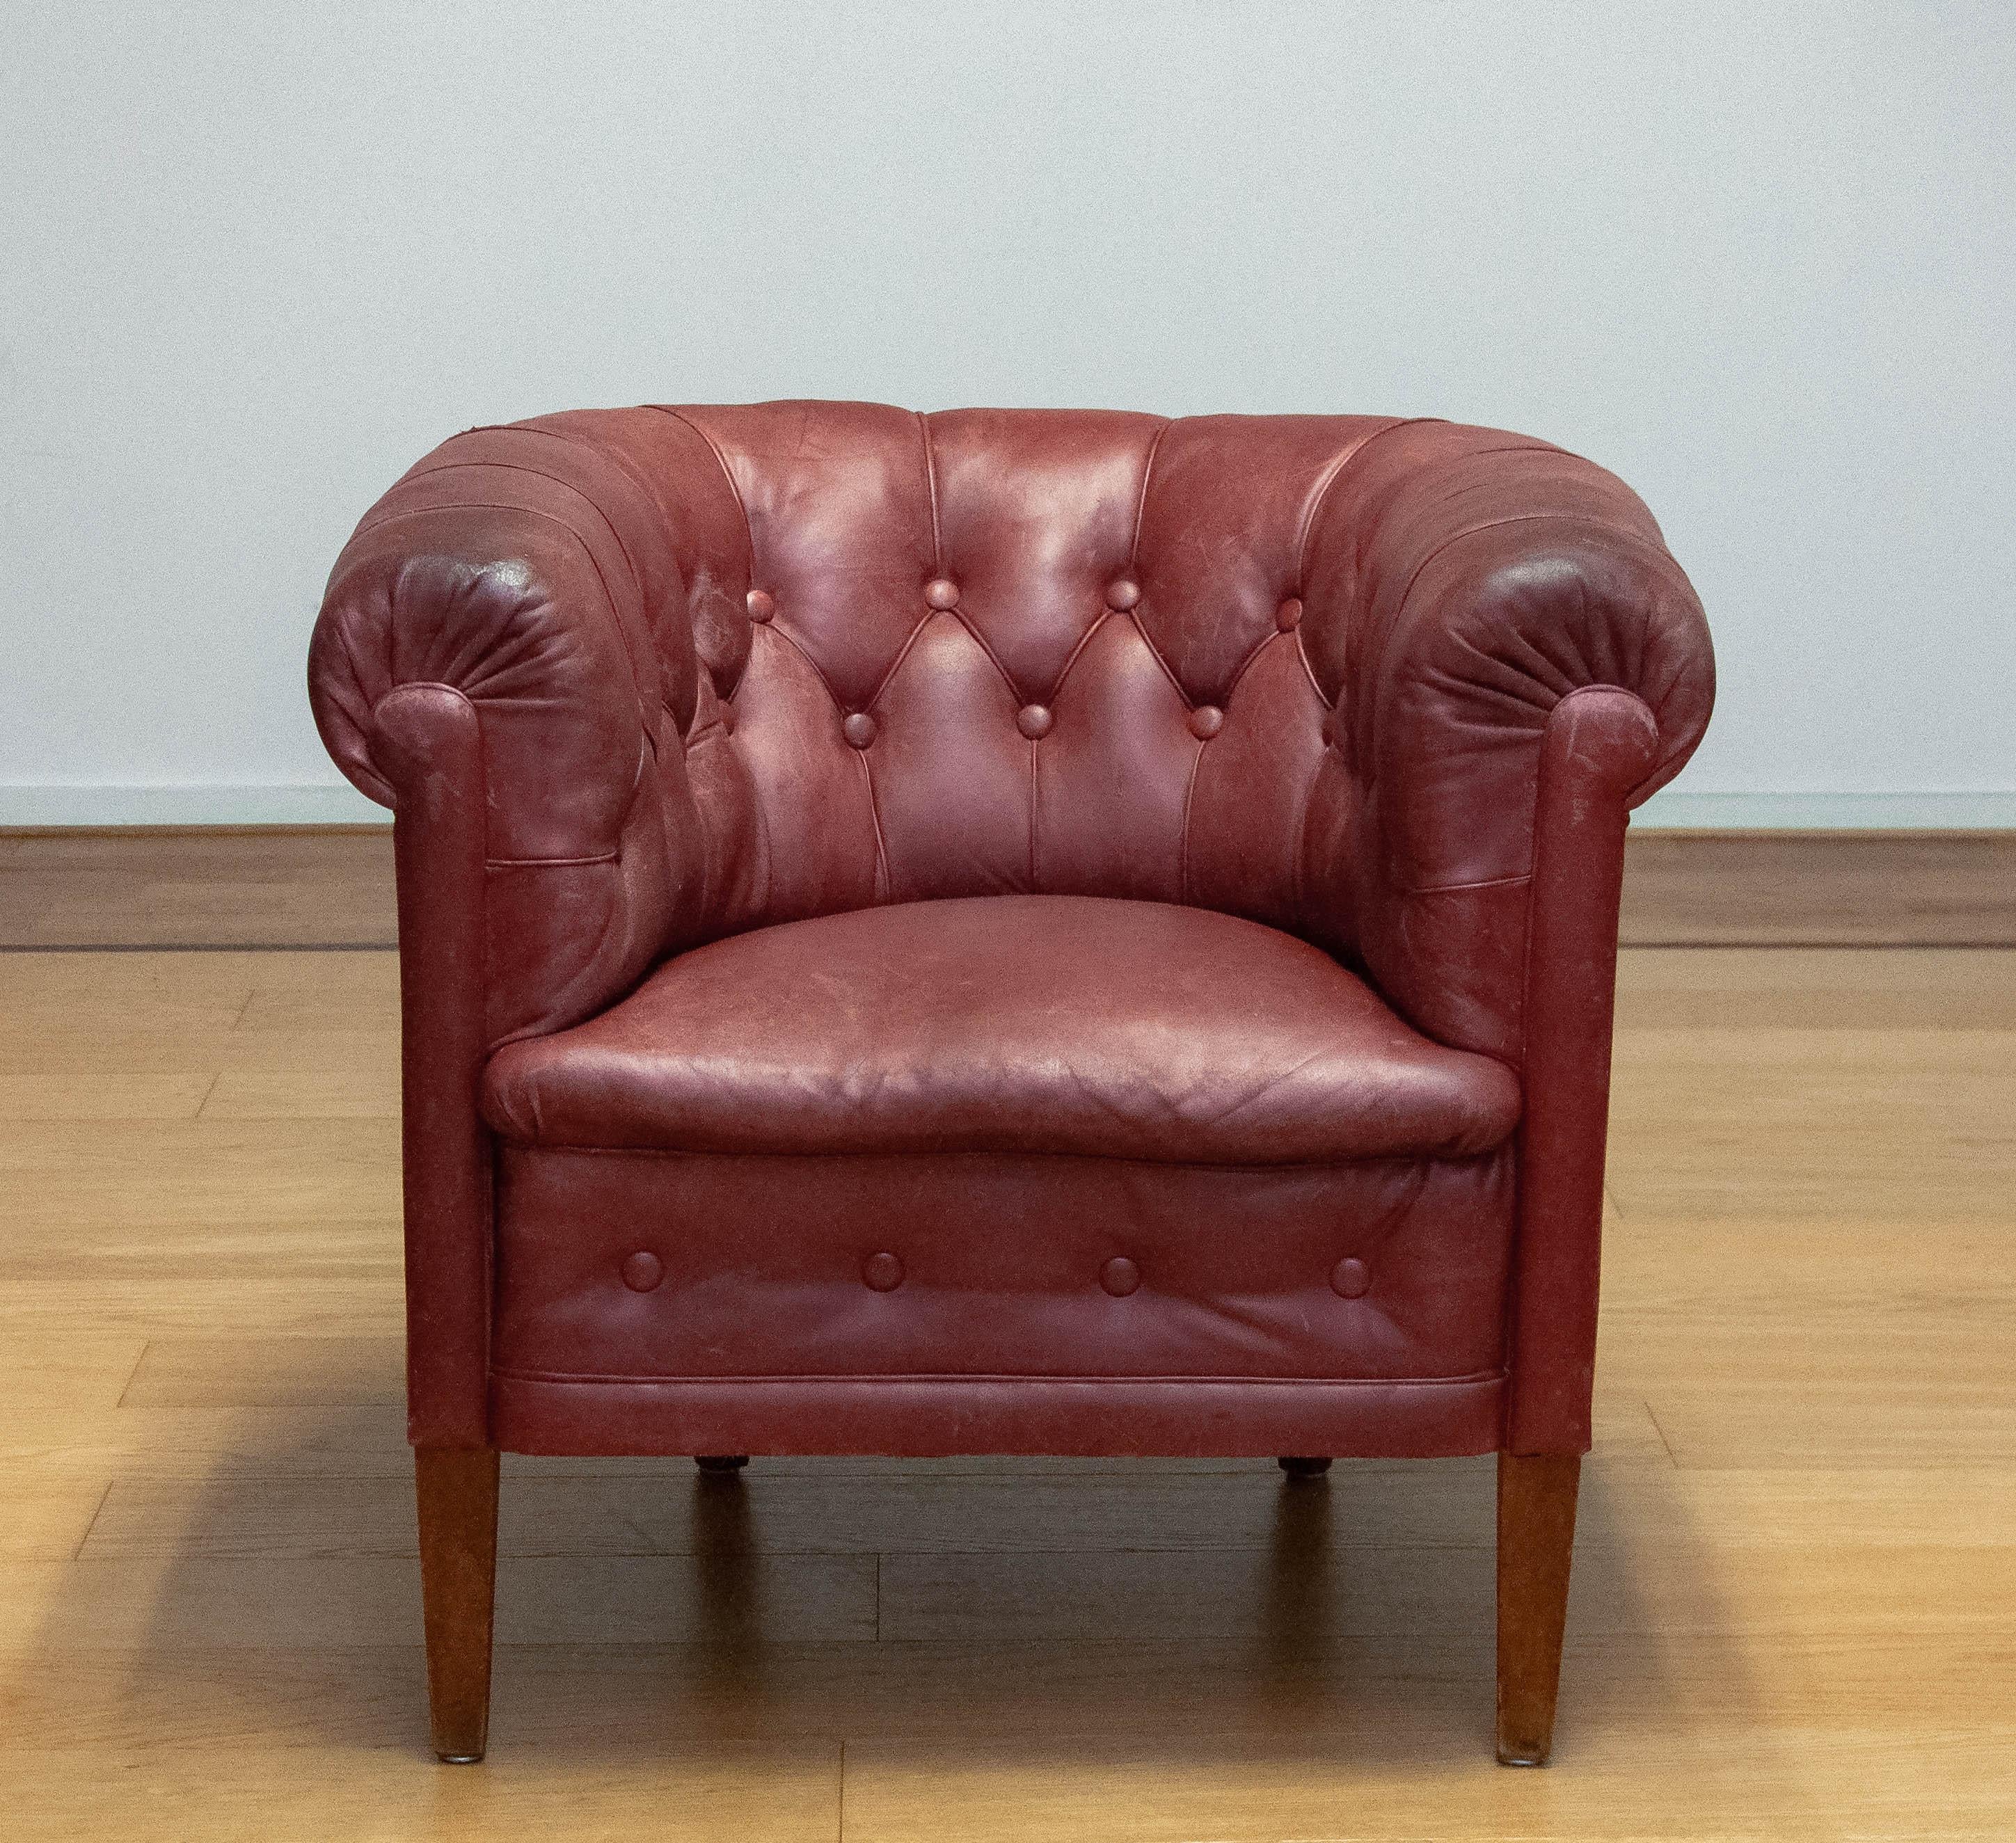 1930s Swedish Crimson Red Chesterfield Club Chair in Patinated Leather For Sale 3